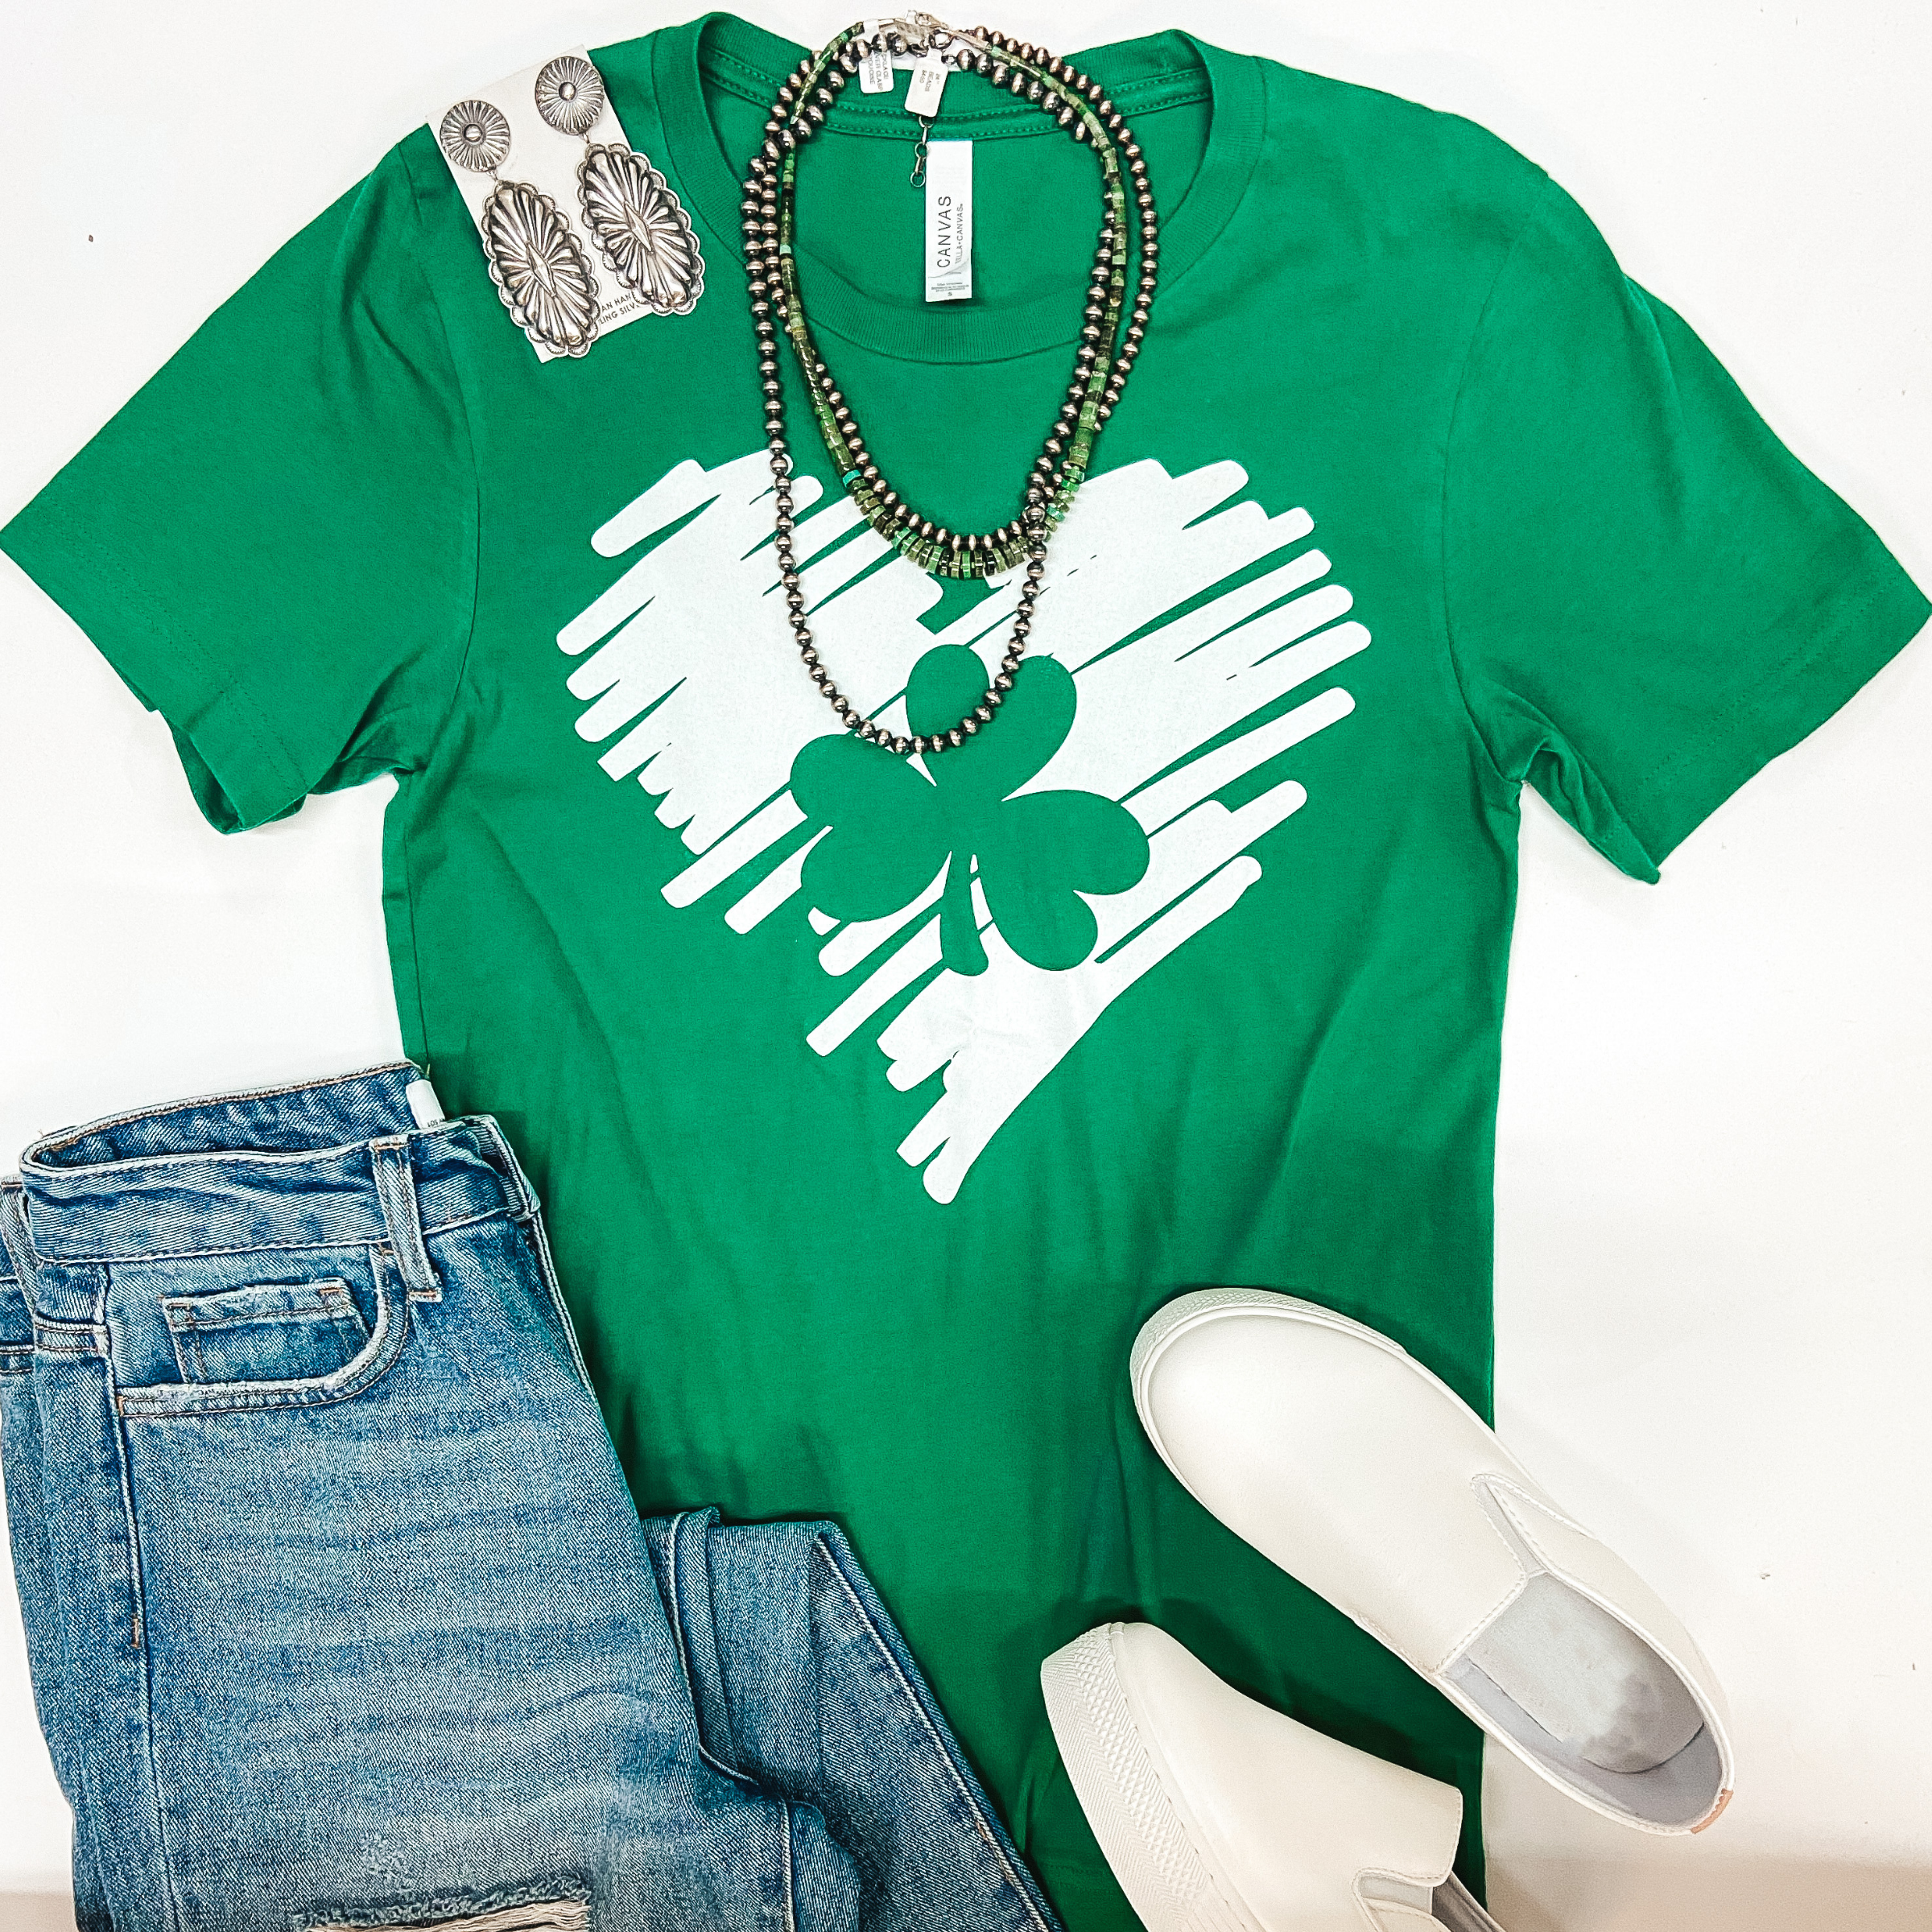 A green tee shirt with a white sketched heart and a clover outline. Pictured with white sneakers, silver jewelry, and light wash distressed jeans.